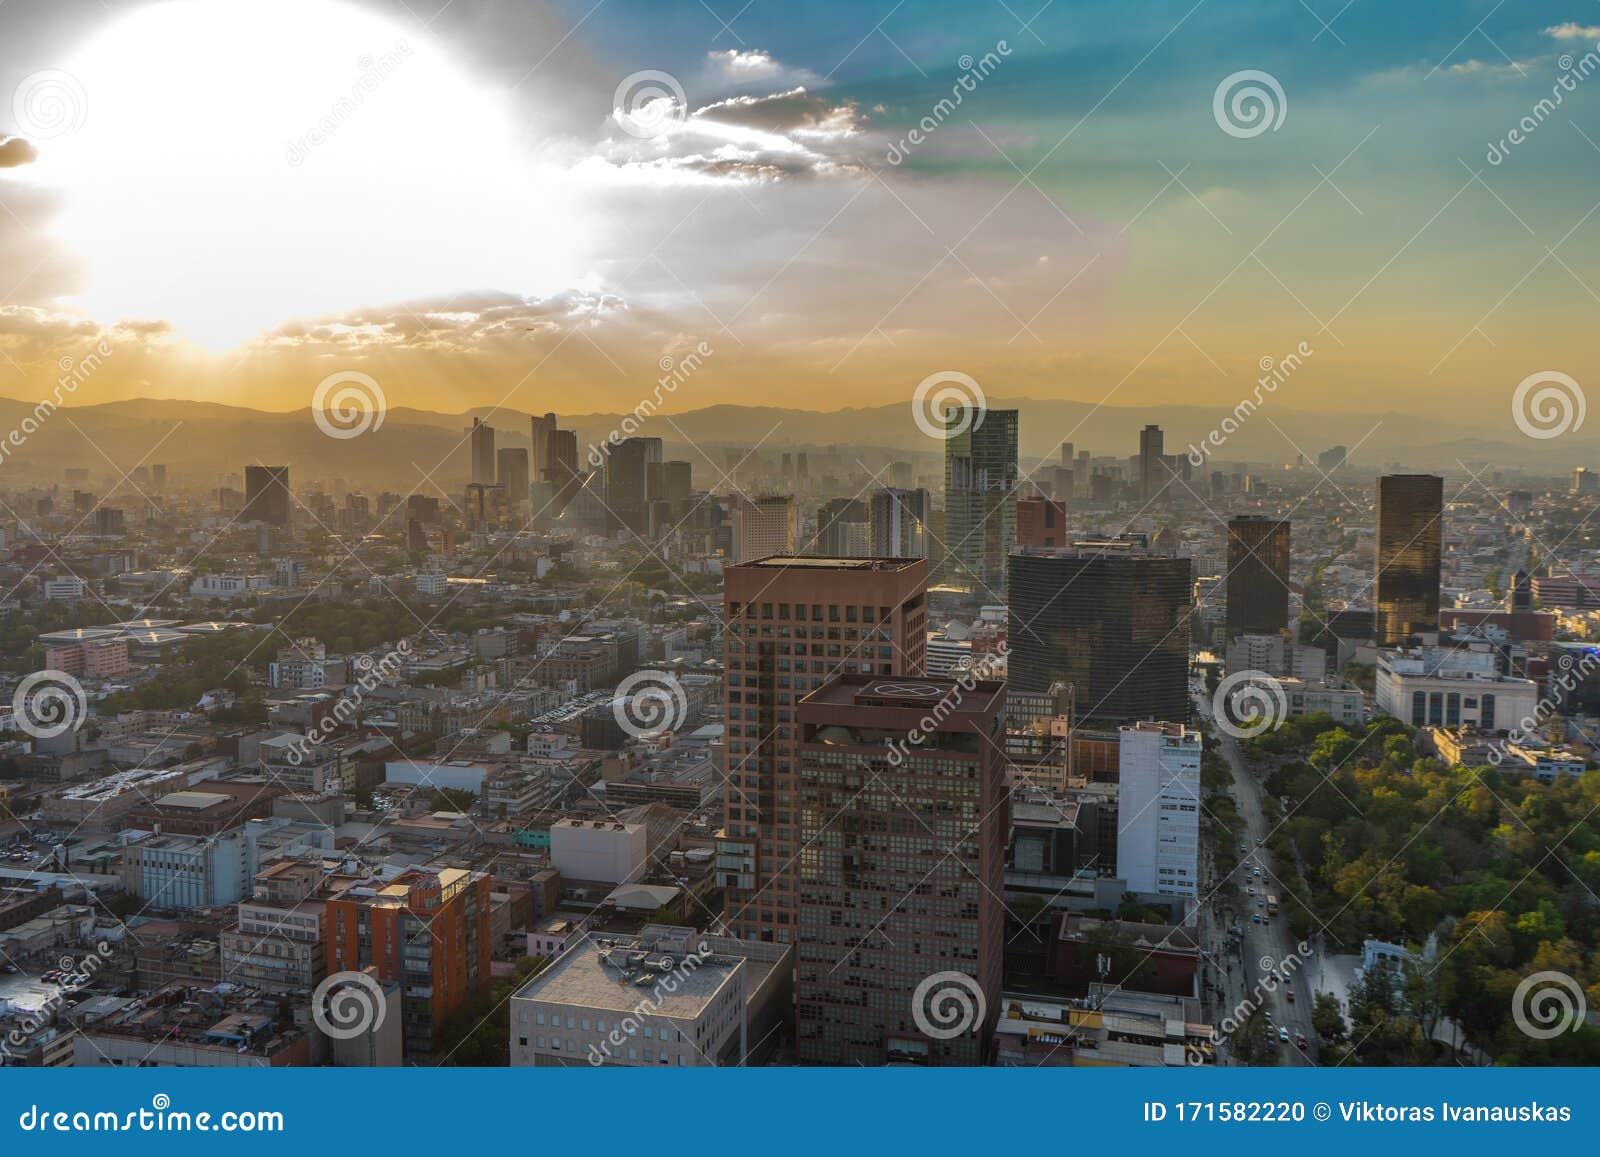 panorama of mexico city central part from skyscraper latino americano. view with buildings. travel photo, background, wallpaper.